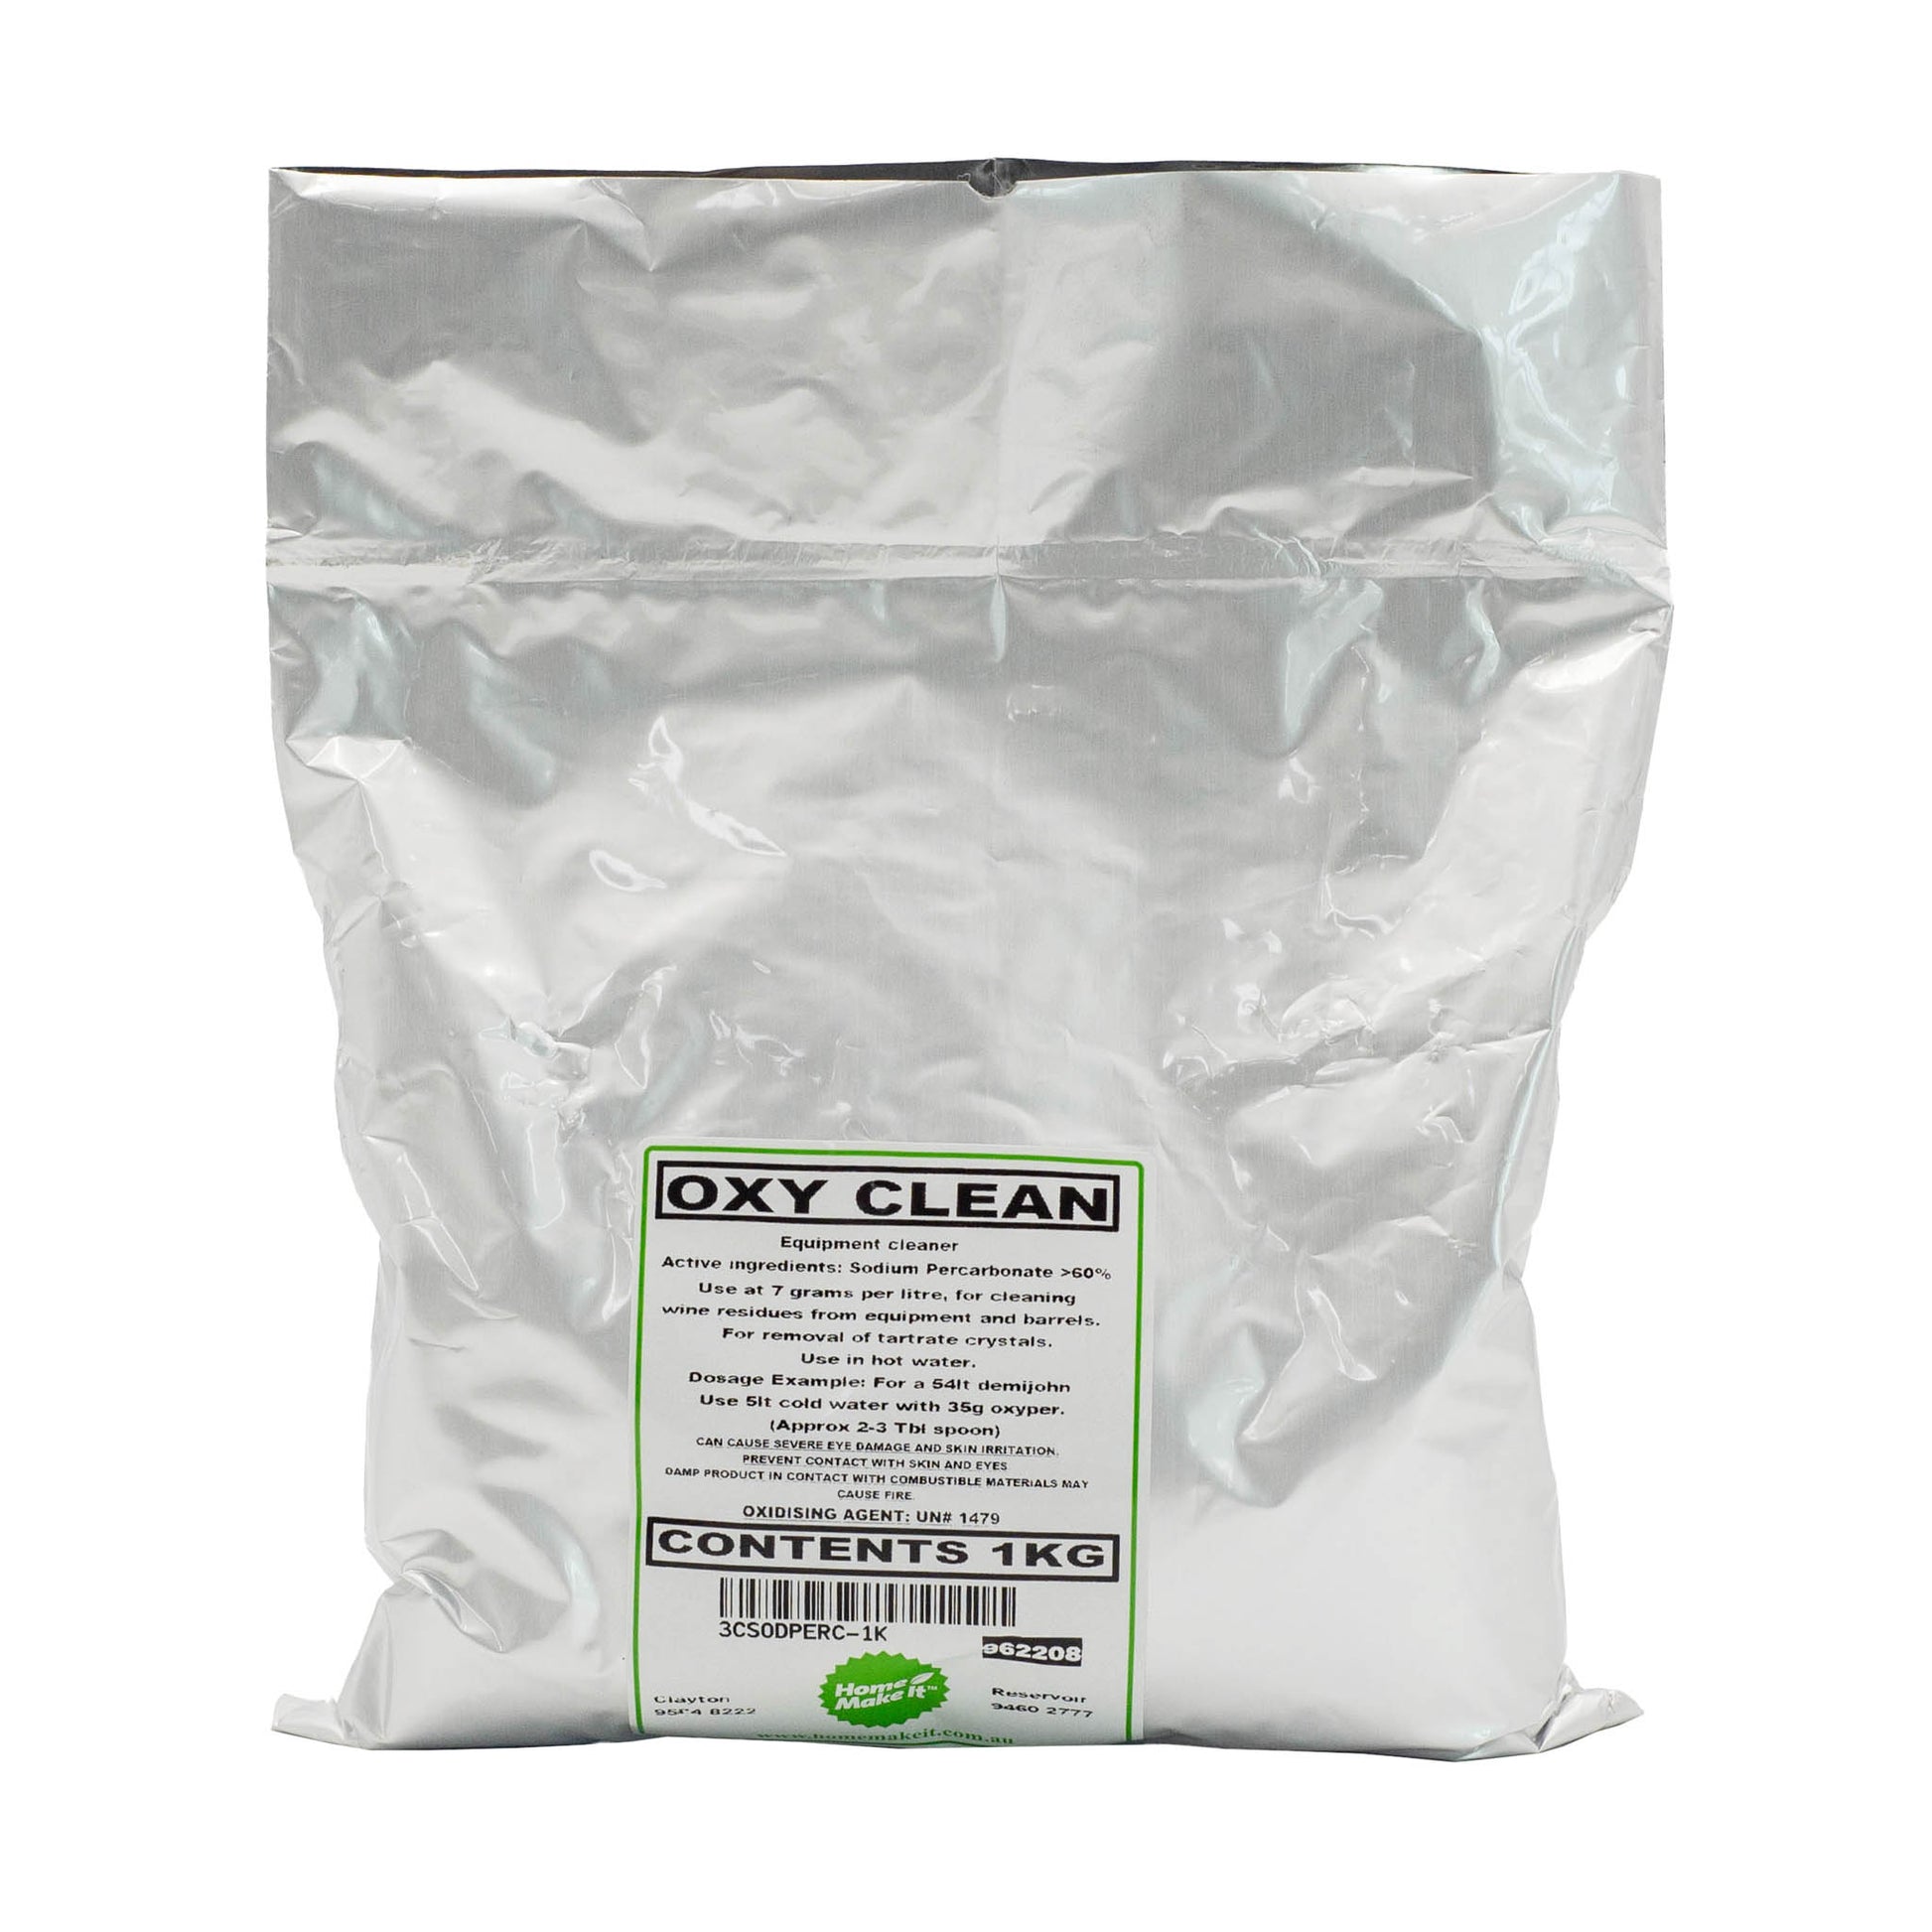 1kg bag of sodium percarbonate or oxy clean is an alkaline chemical found in cleaning products